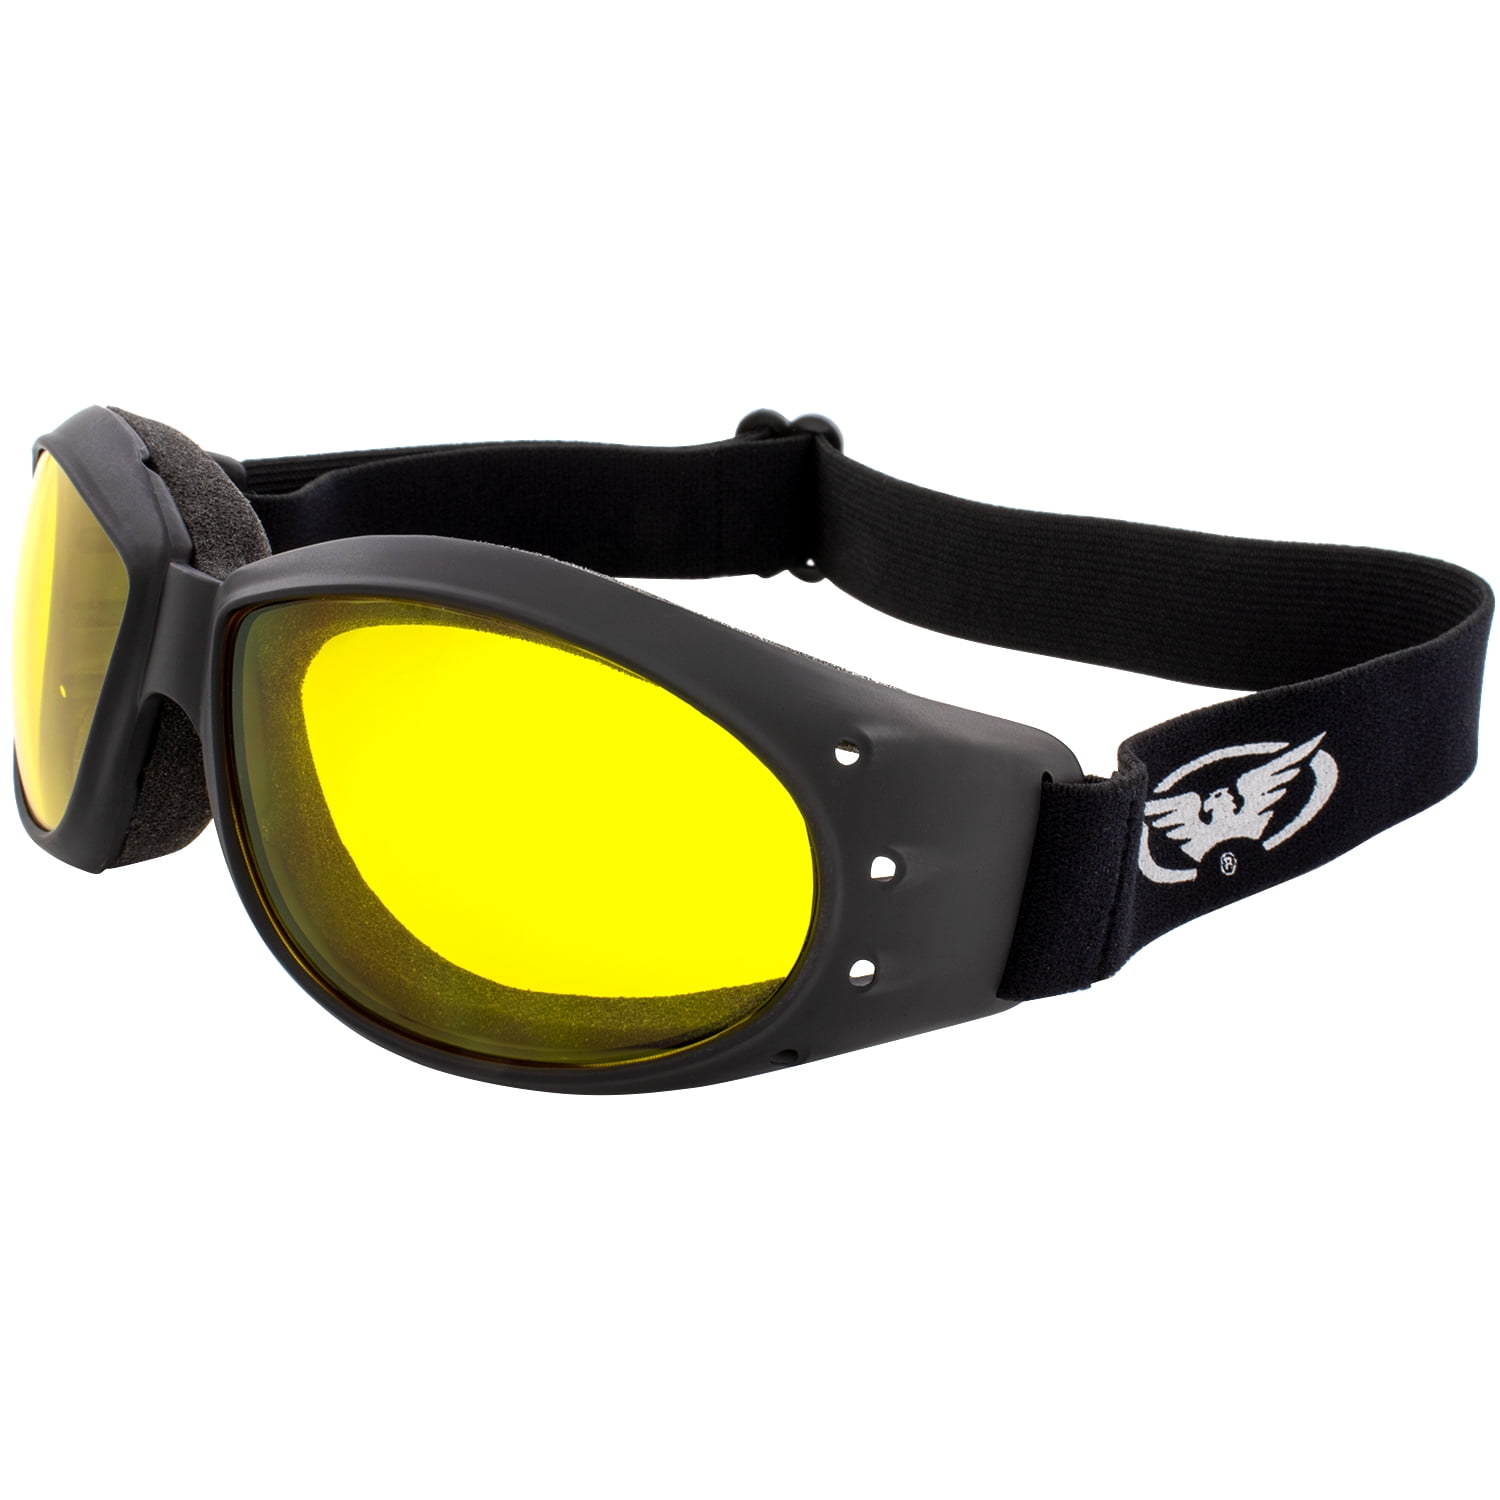 Eliminator 24 Yellow Smoke Transitional Lens Red Baron Motorcycle Aviator  Riding Goggles Day Night With Photocromatic Transition Lens Boxed Includes  MicroFiber Pouch for Storage and Cleaning. 